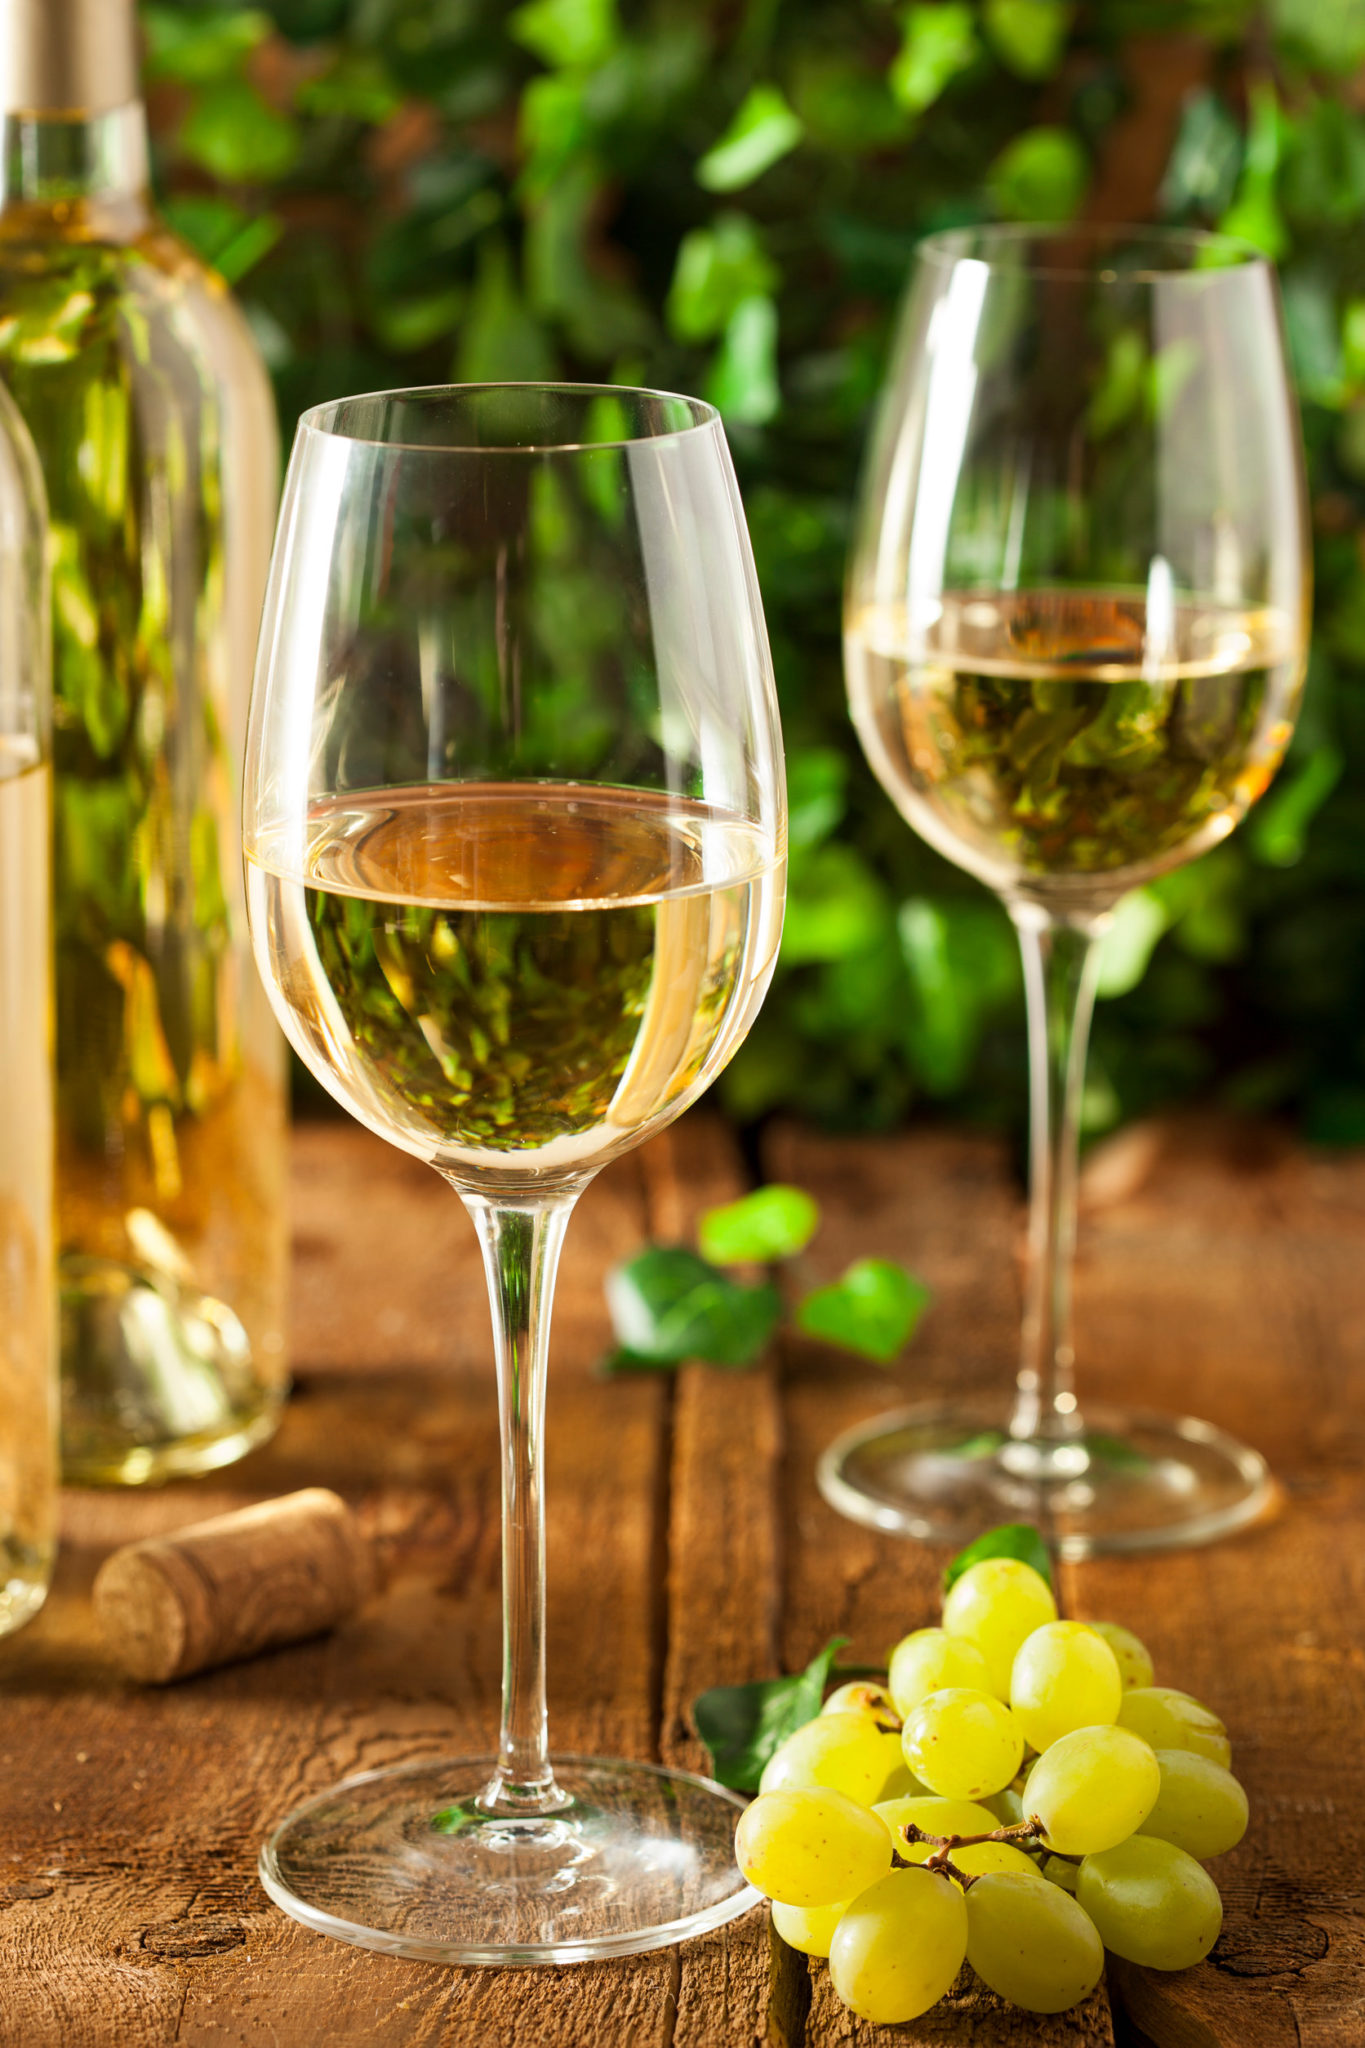 Best Chardonnay Wine 12 Wines To Enjoy From France and the USA